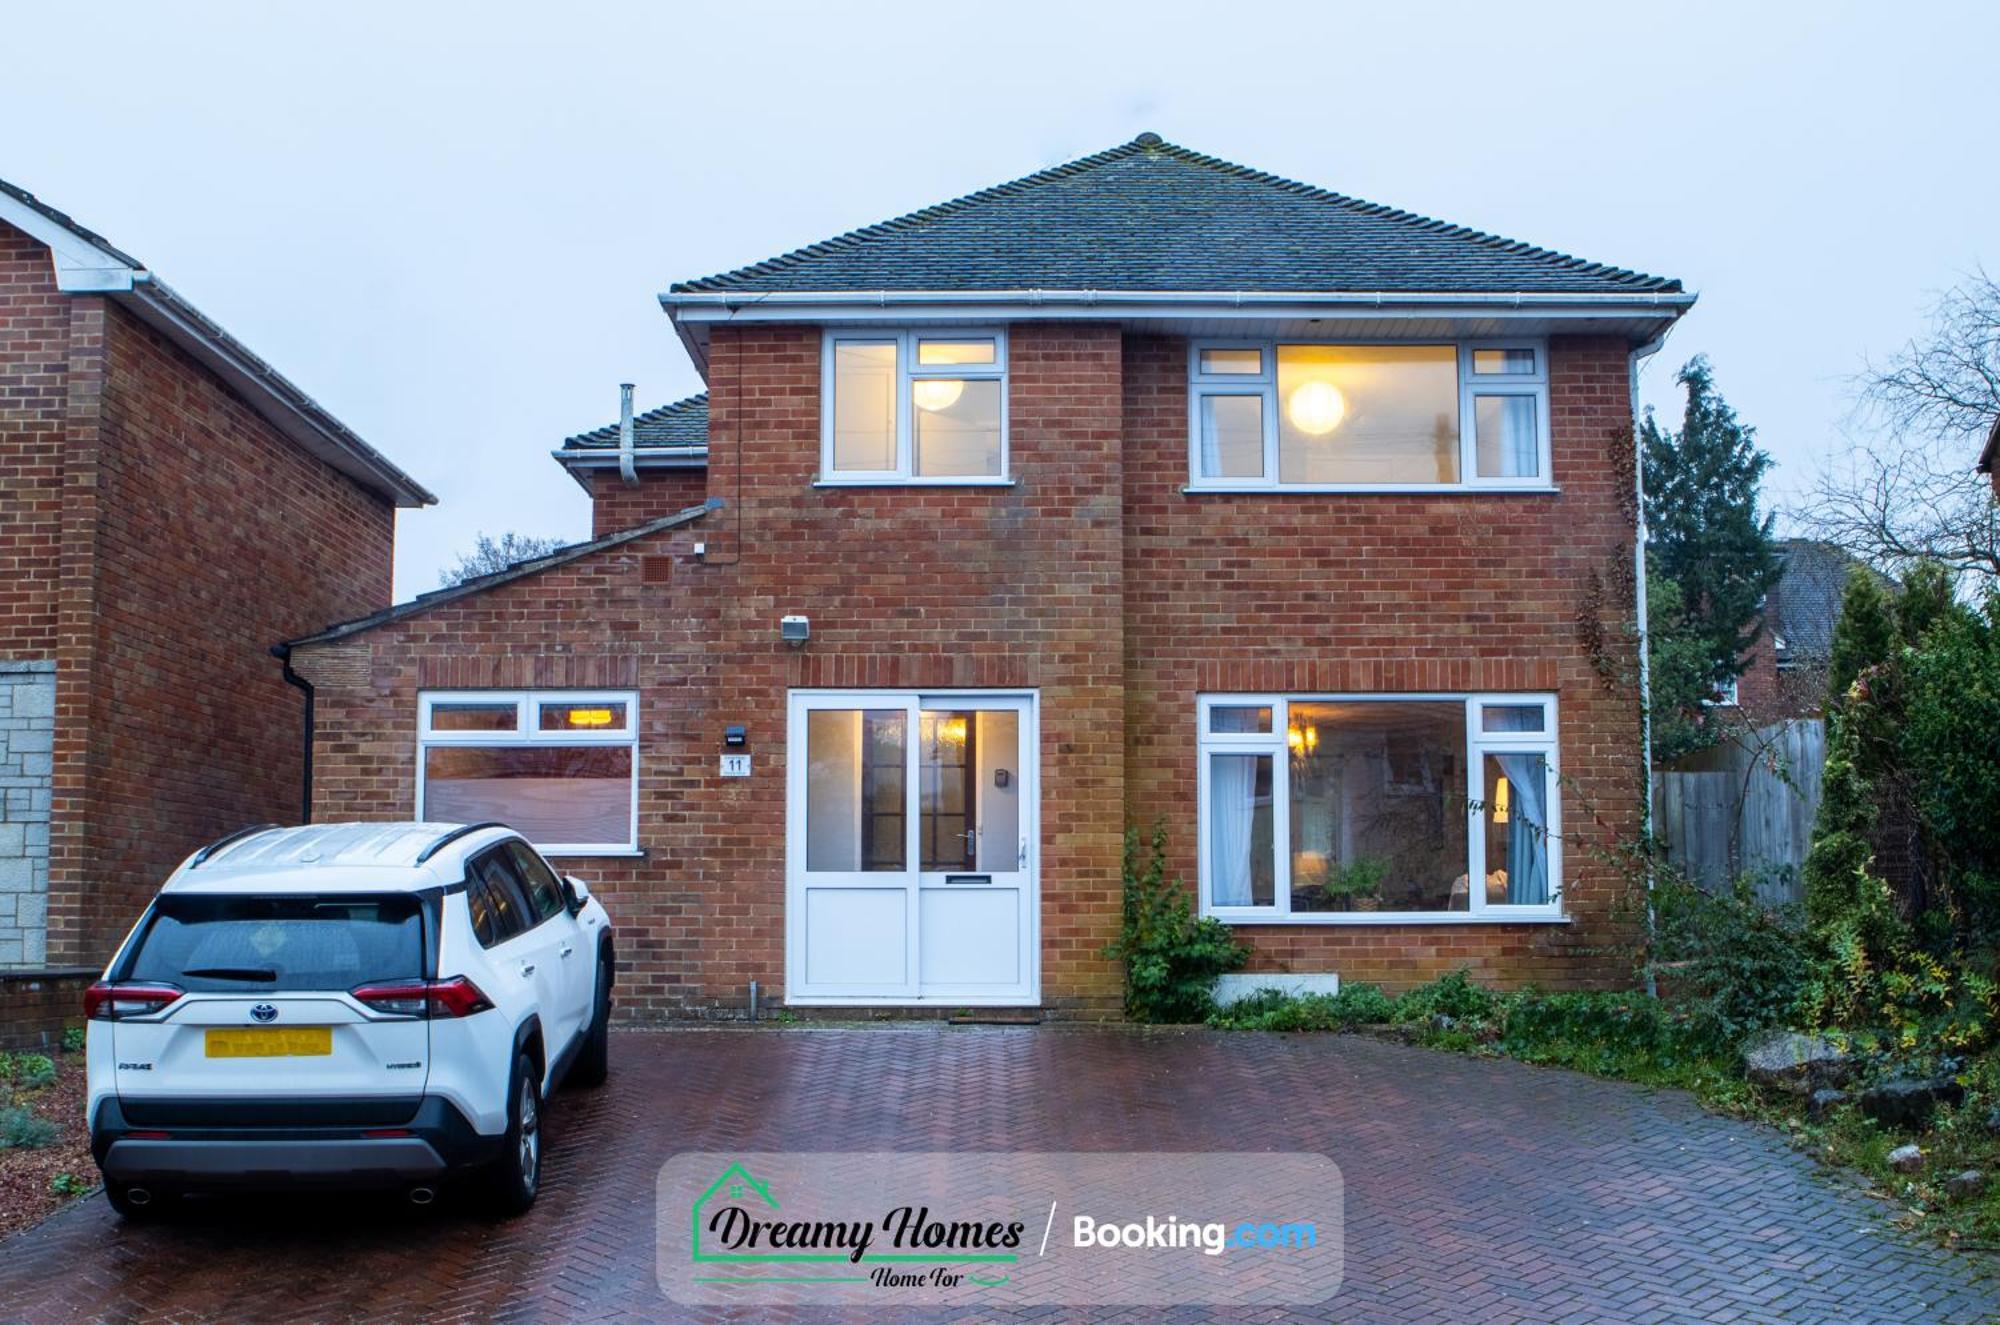 Four Bedroom Spacious House By Dreamy Homes Short Lets And Serviced Accommodation With Free Parking Near Salisbury City Centre Old Sarum 外观 照片